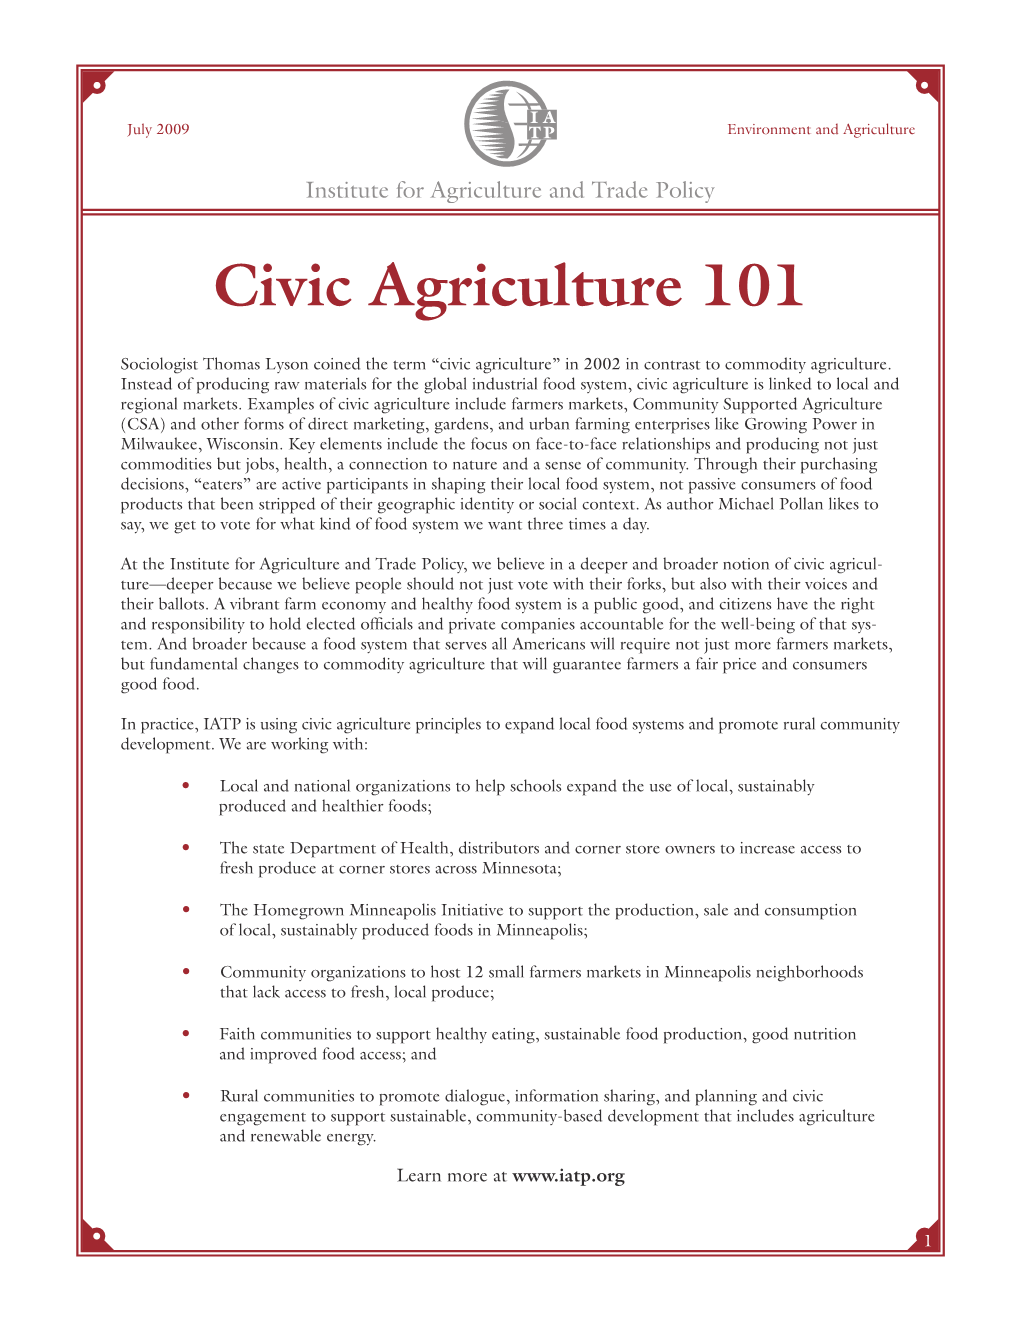 Civic Agriculture 101